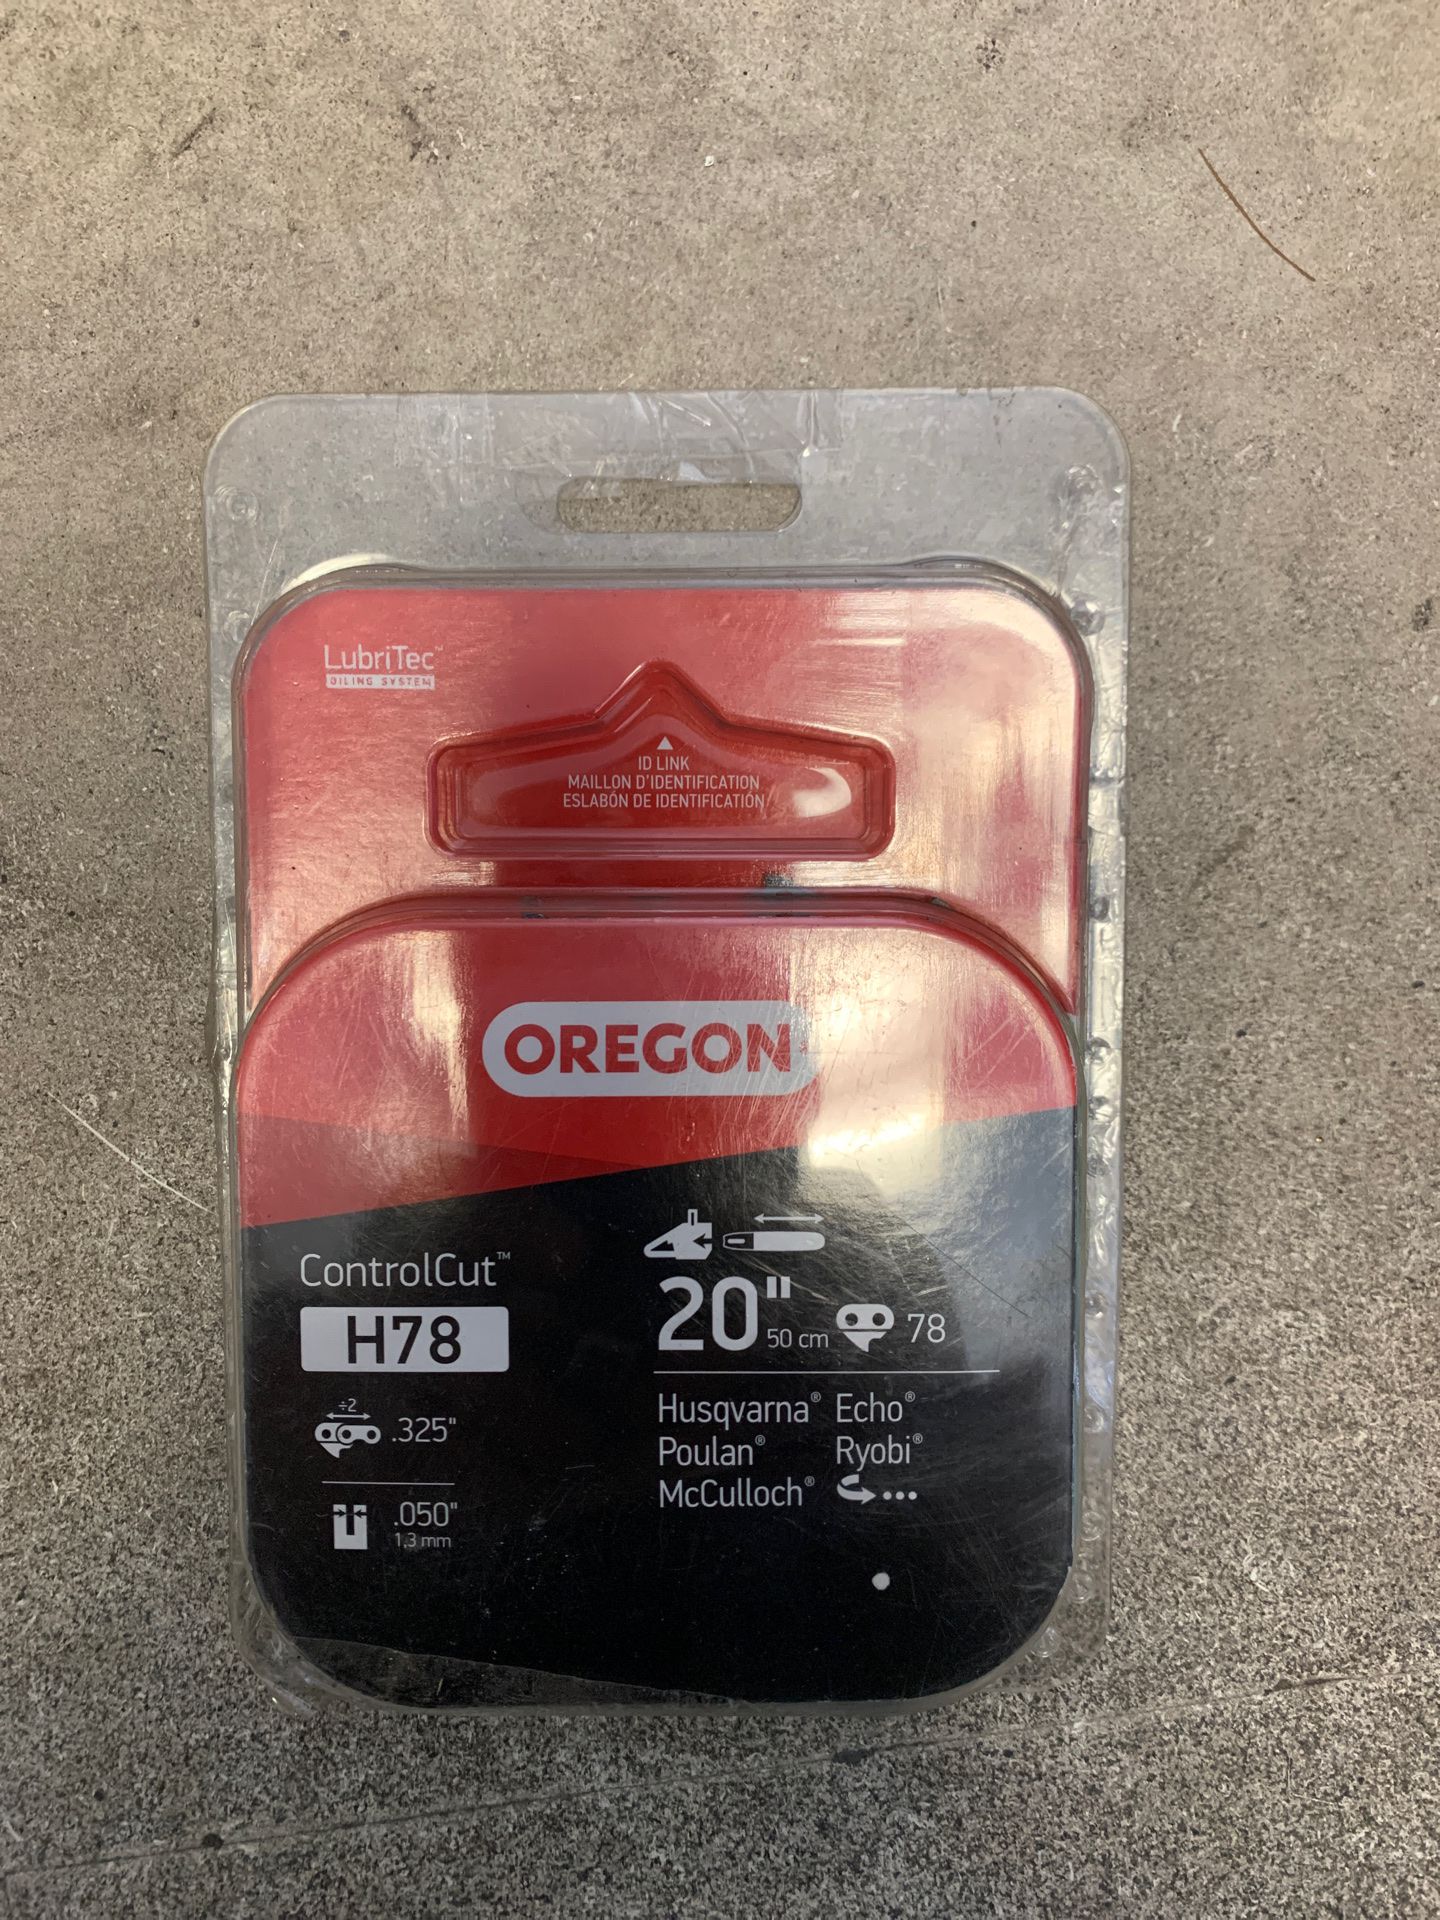 Oregon 20” H78 replacement chain for chainsaw— new!!